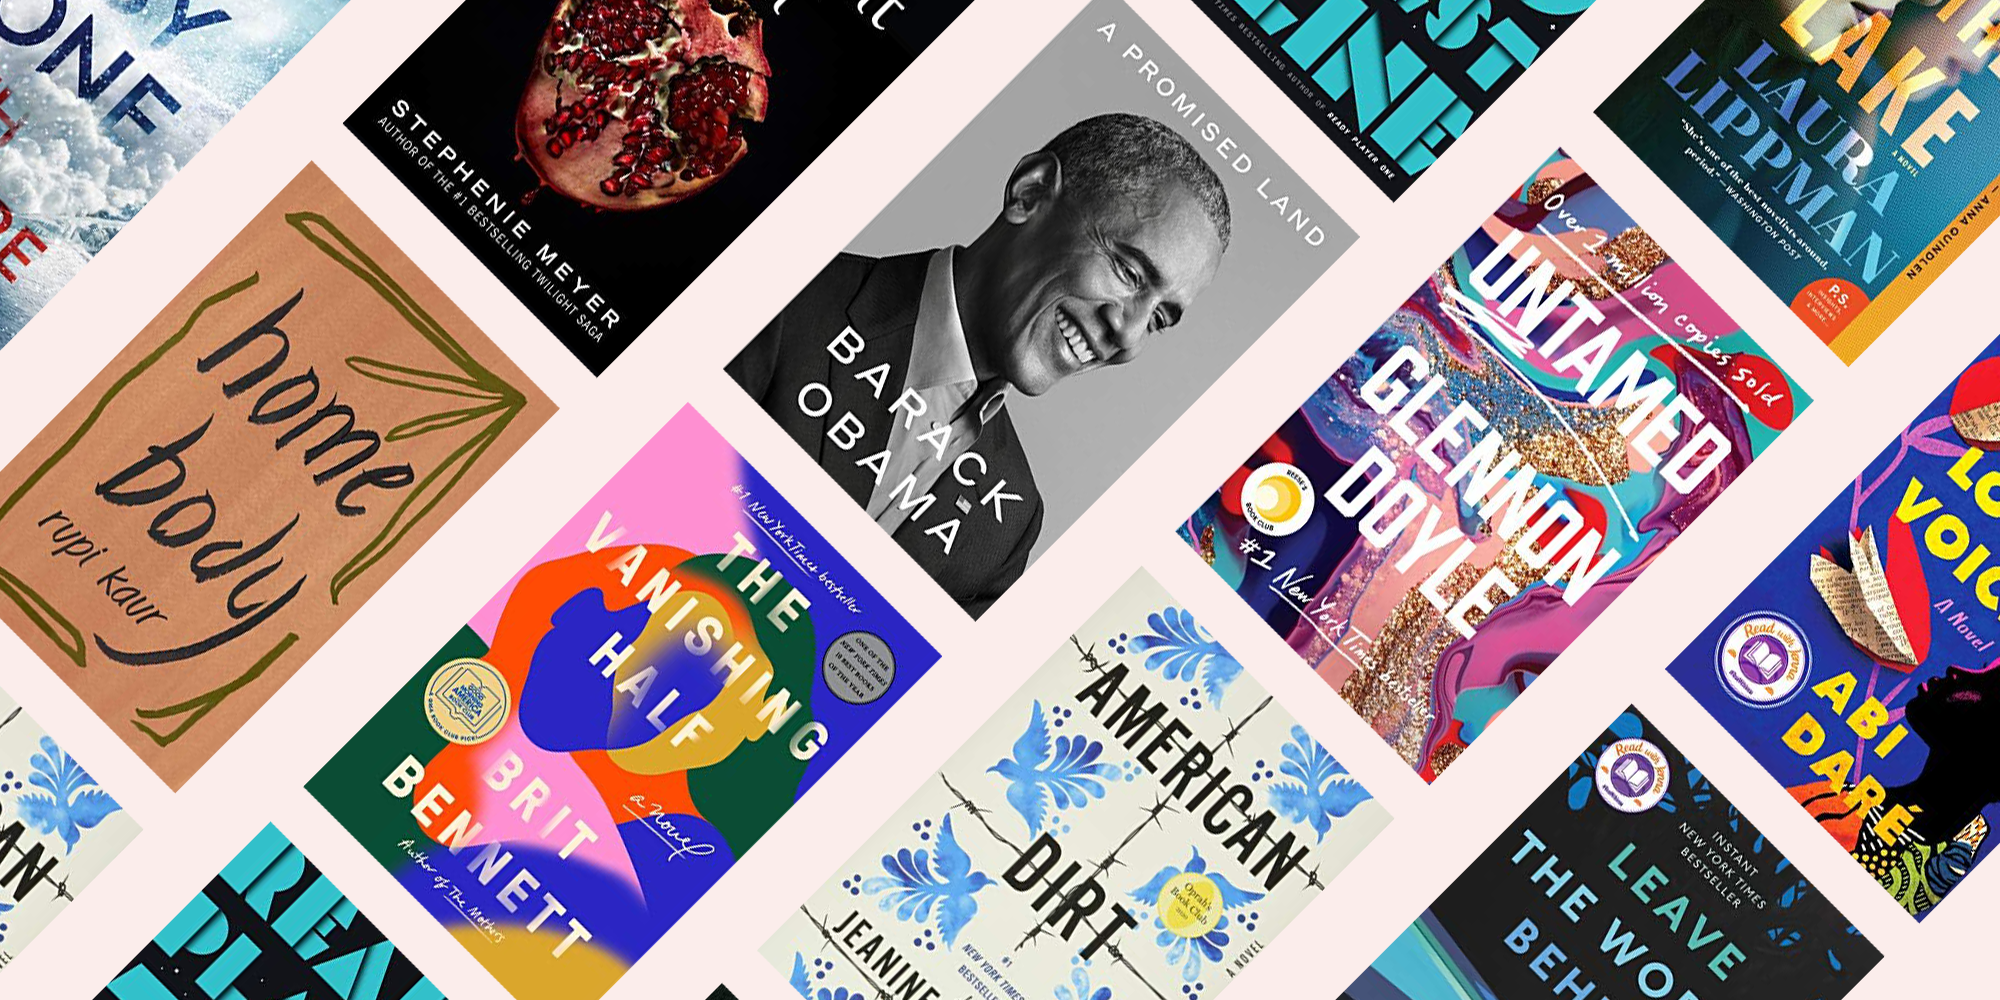 Best-Selling Books of 2020 - Best Reads of 2020